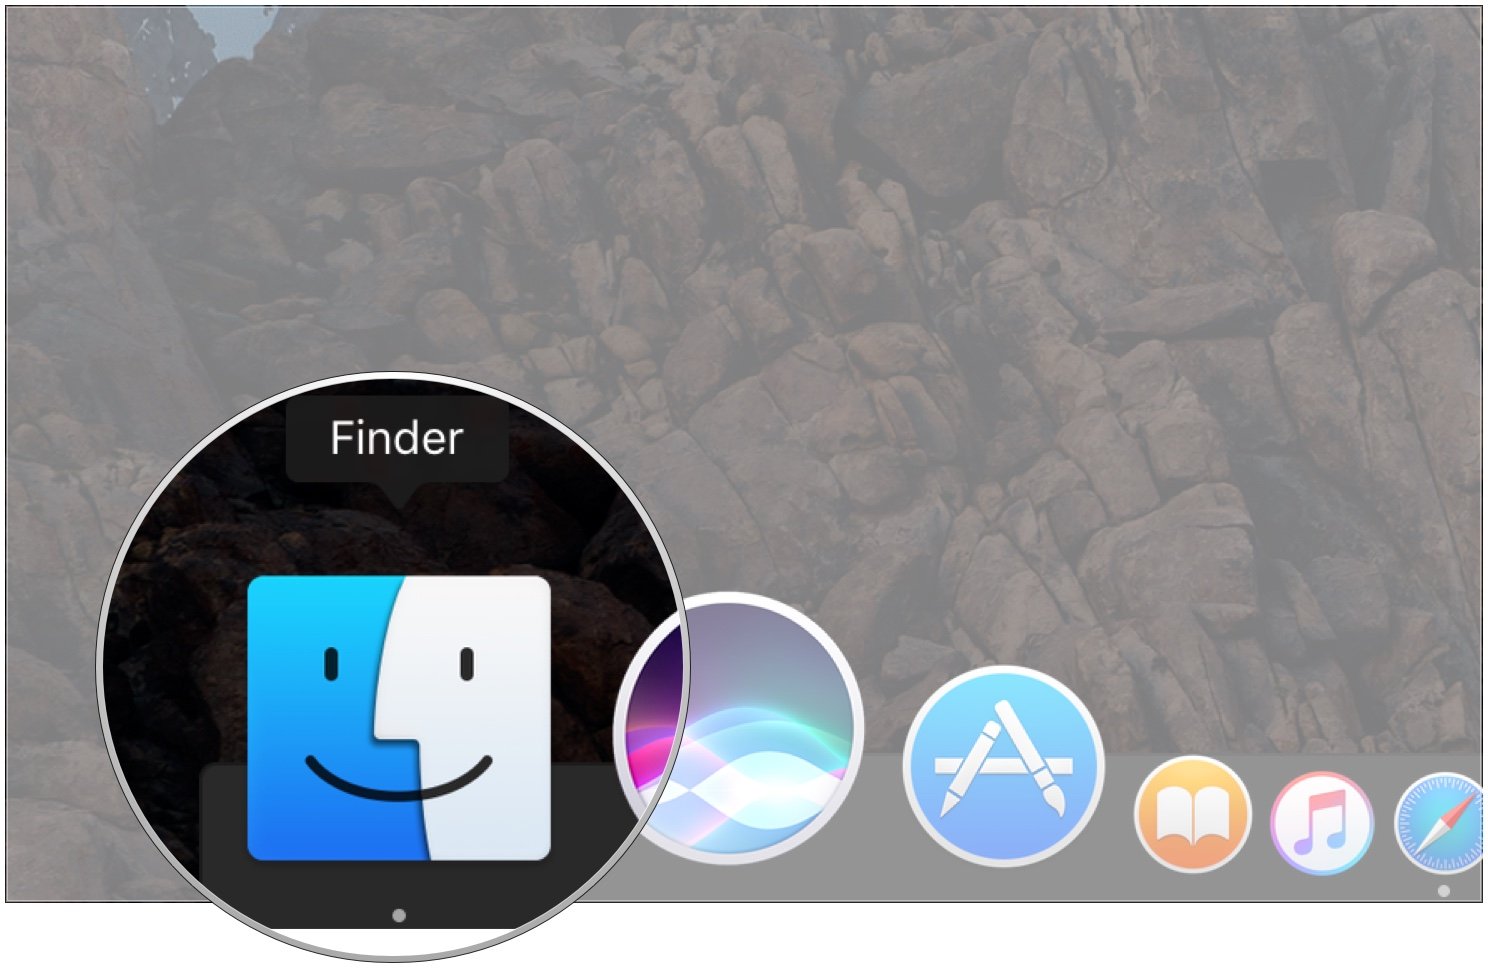 To open a Finder window click the Finder icon on the Dock.